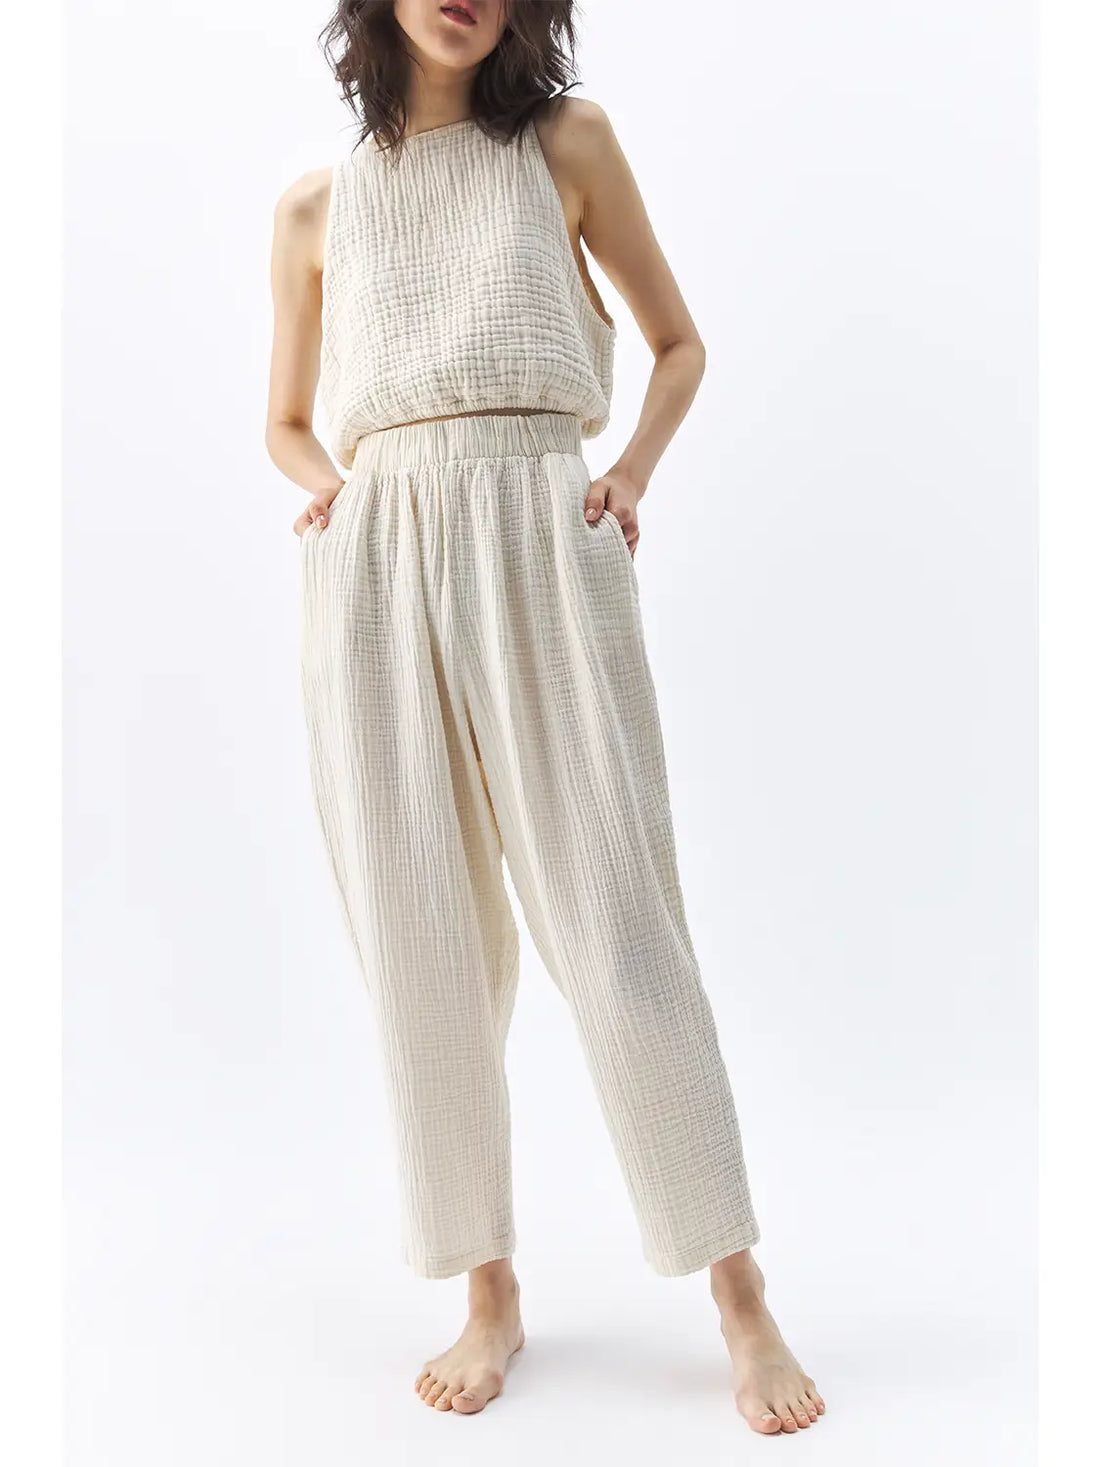 crinkle slouchy pants in cream cotton guaze